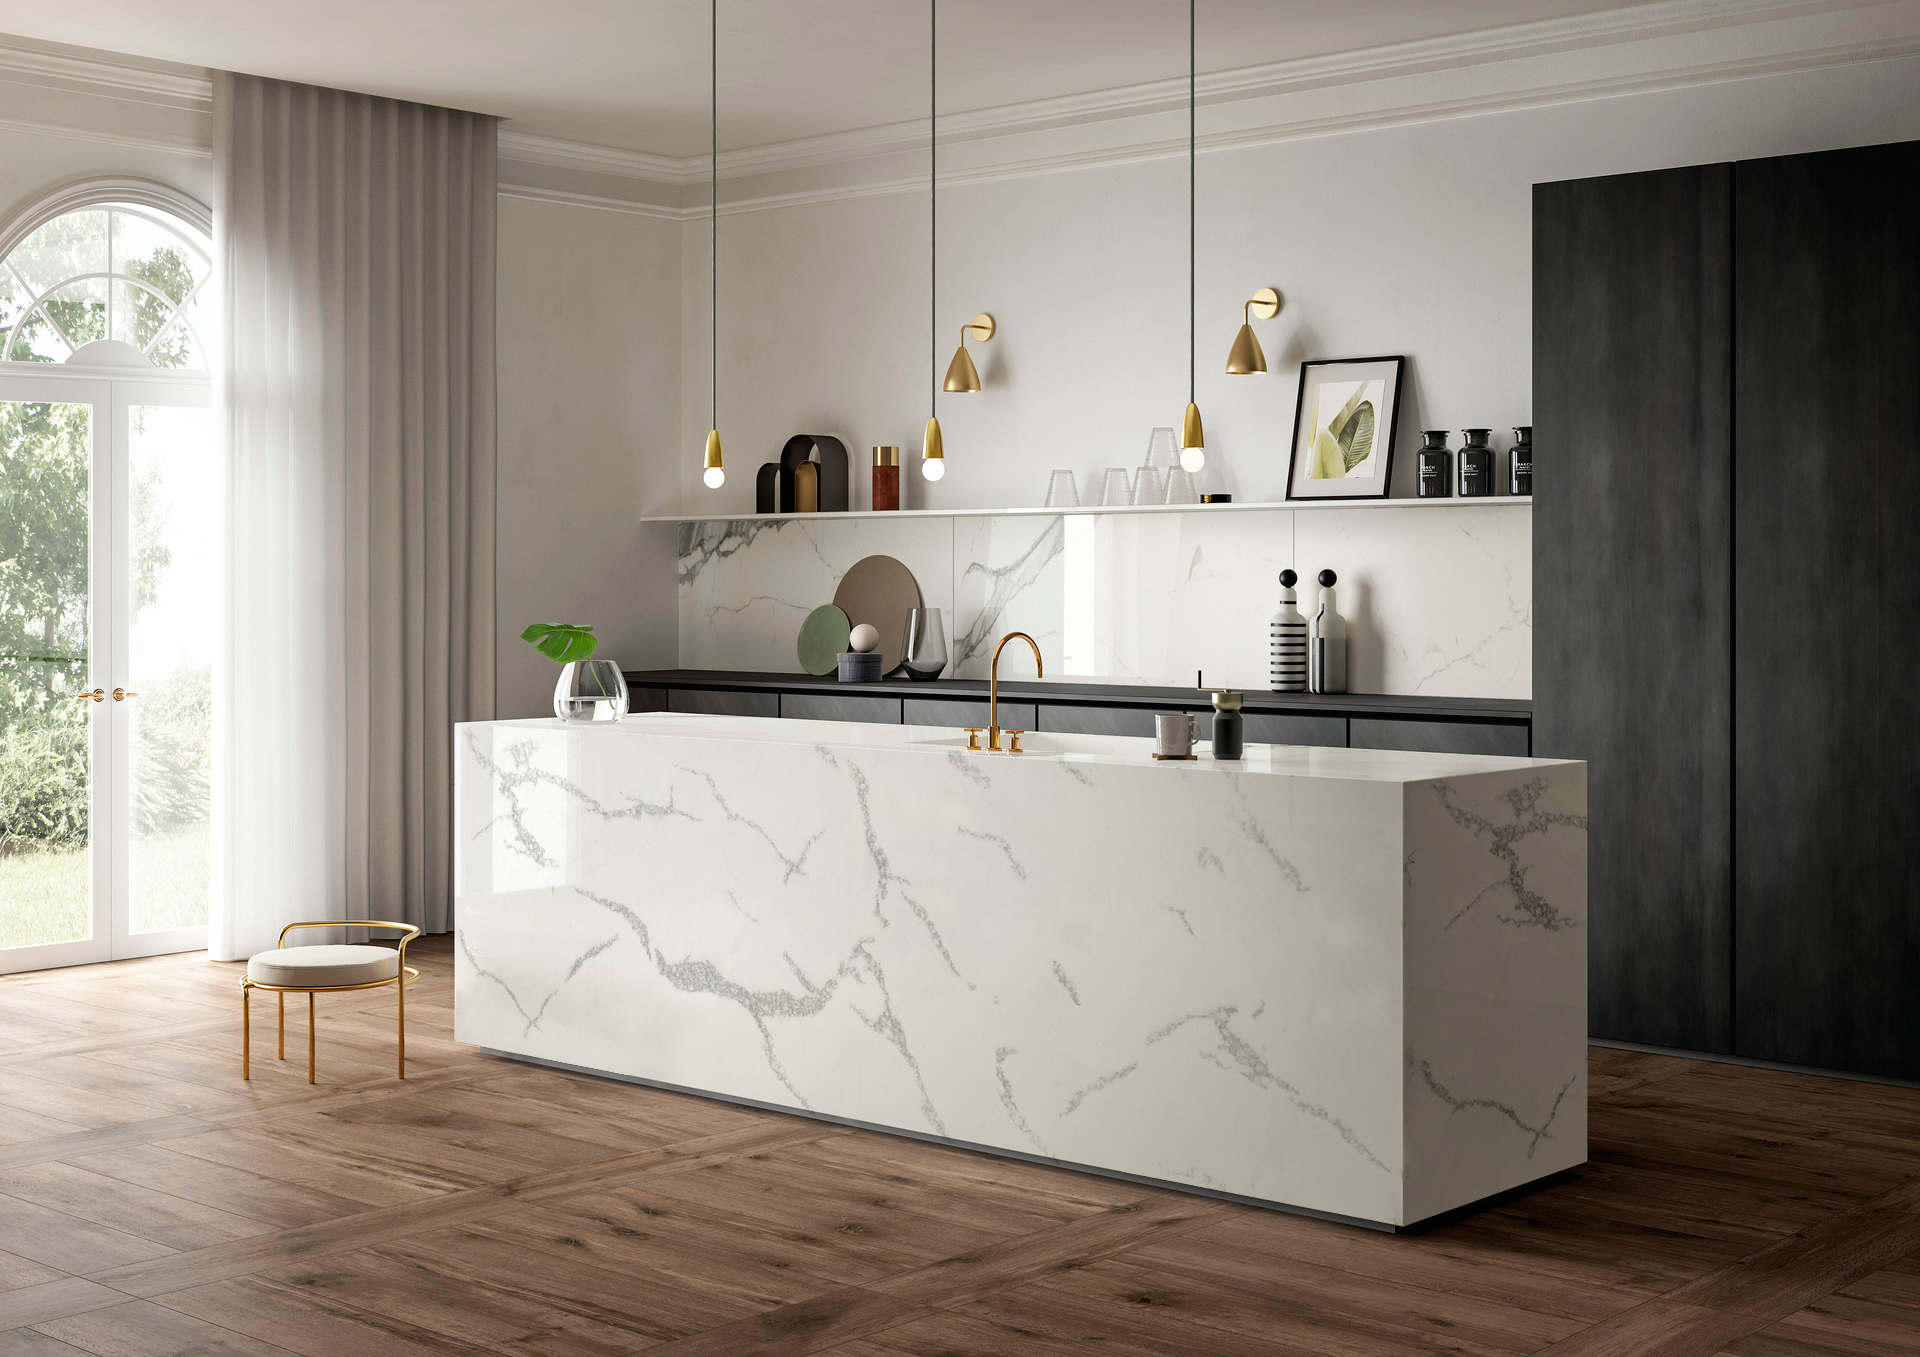 Solid surface is a fashionable and durable material